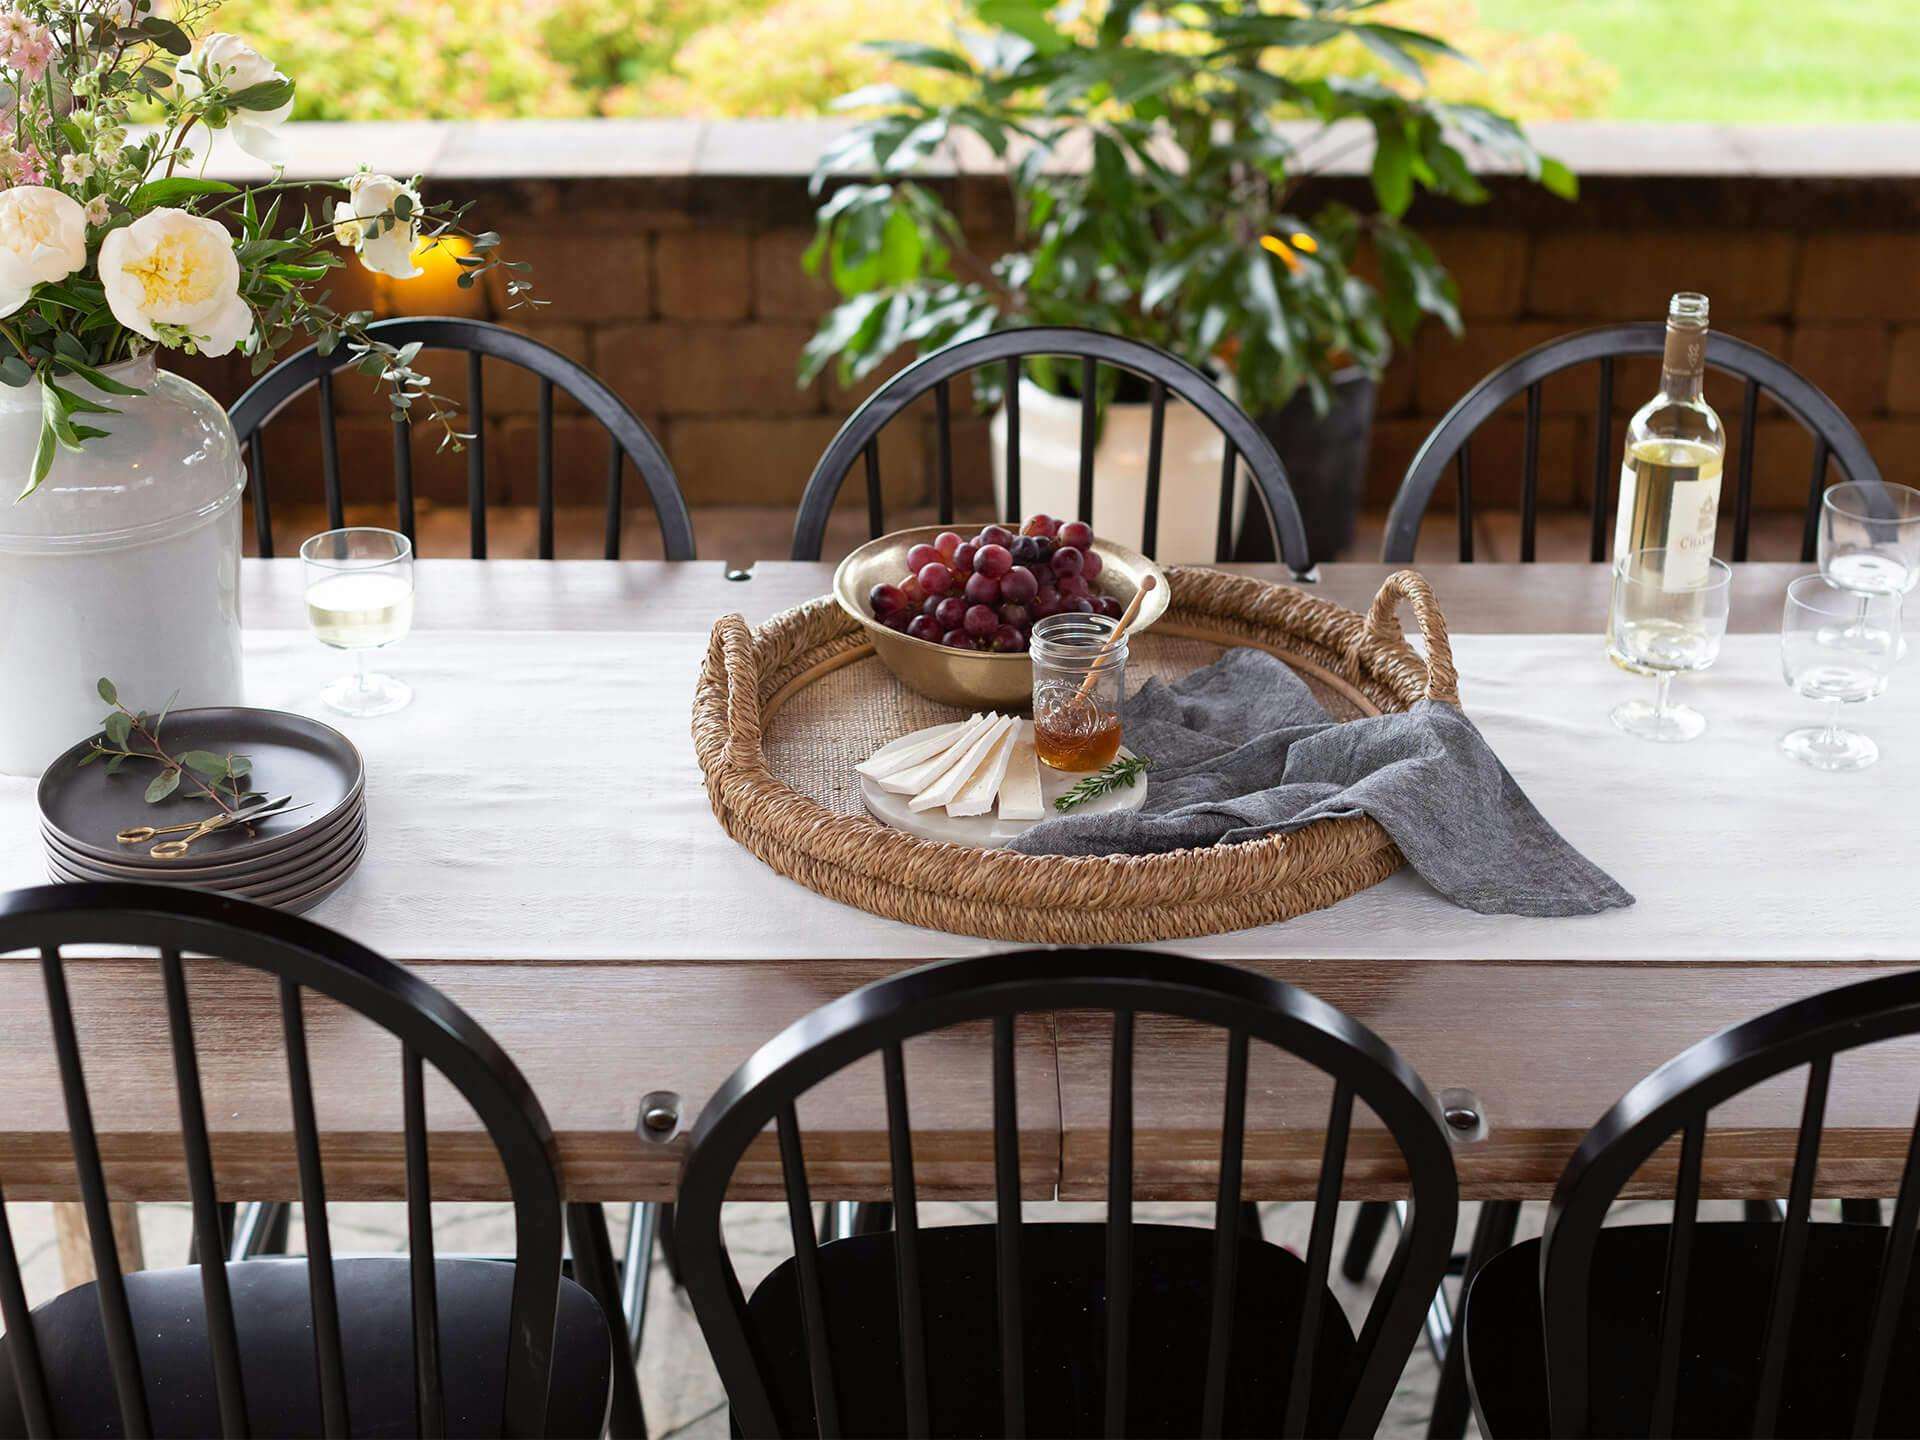 an outdoor table set with a cheese and grape platter